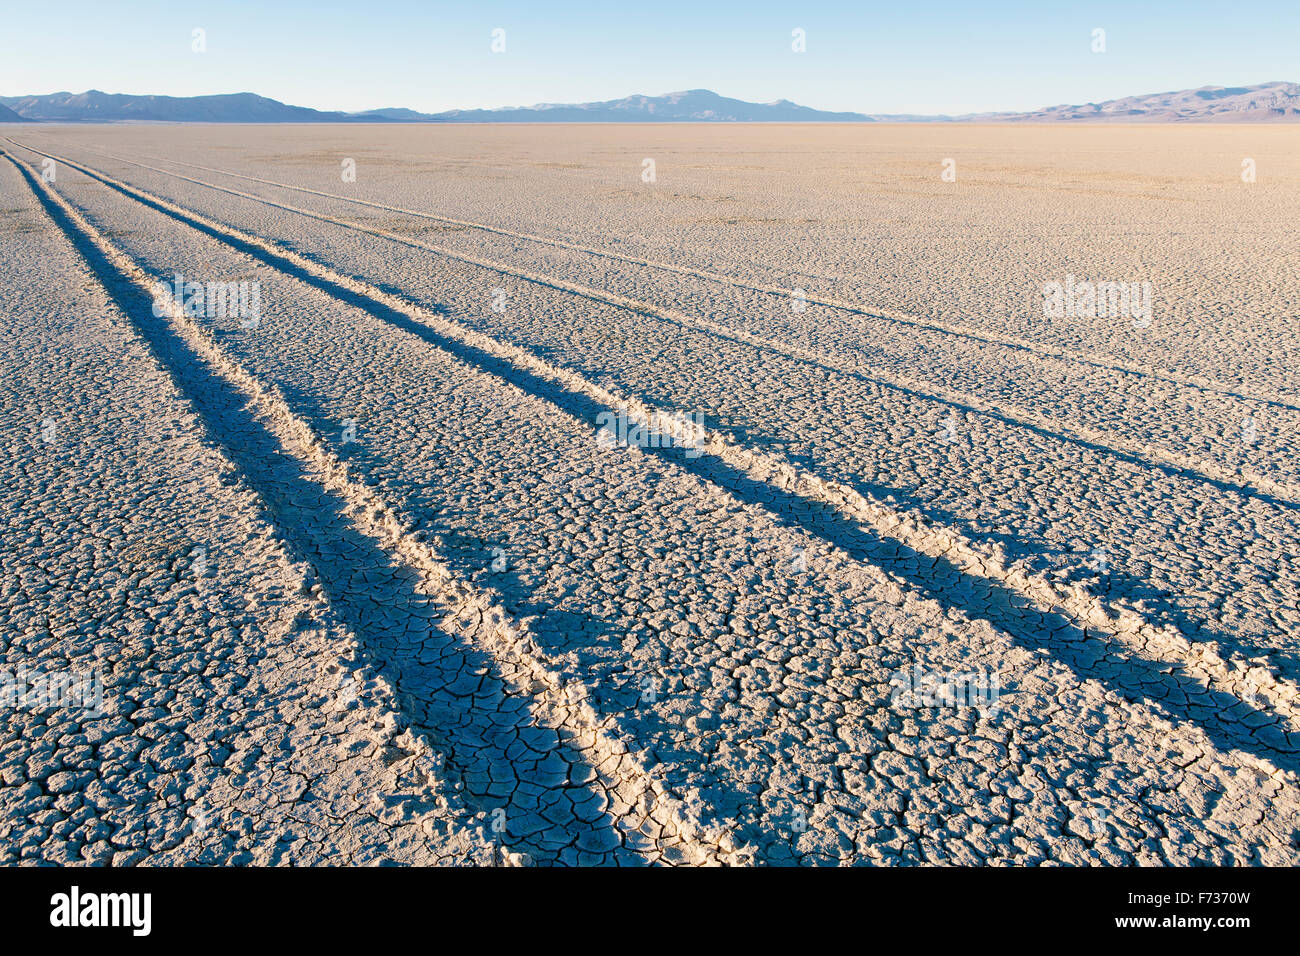 Tire tracks on the dry surface of the desert. Stock Photo